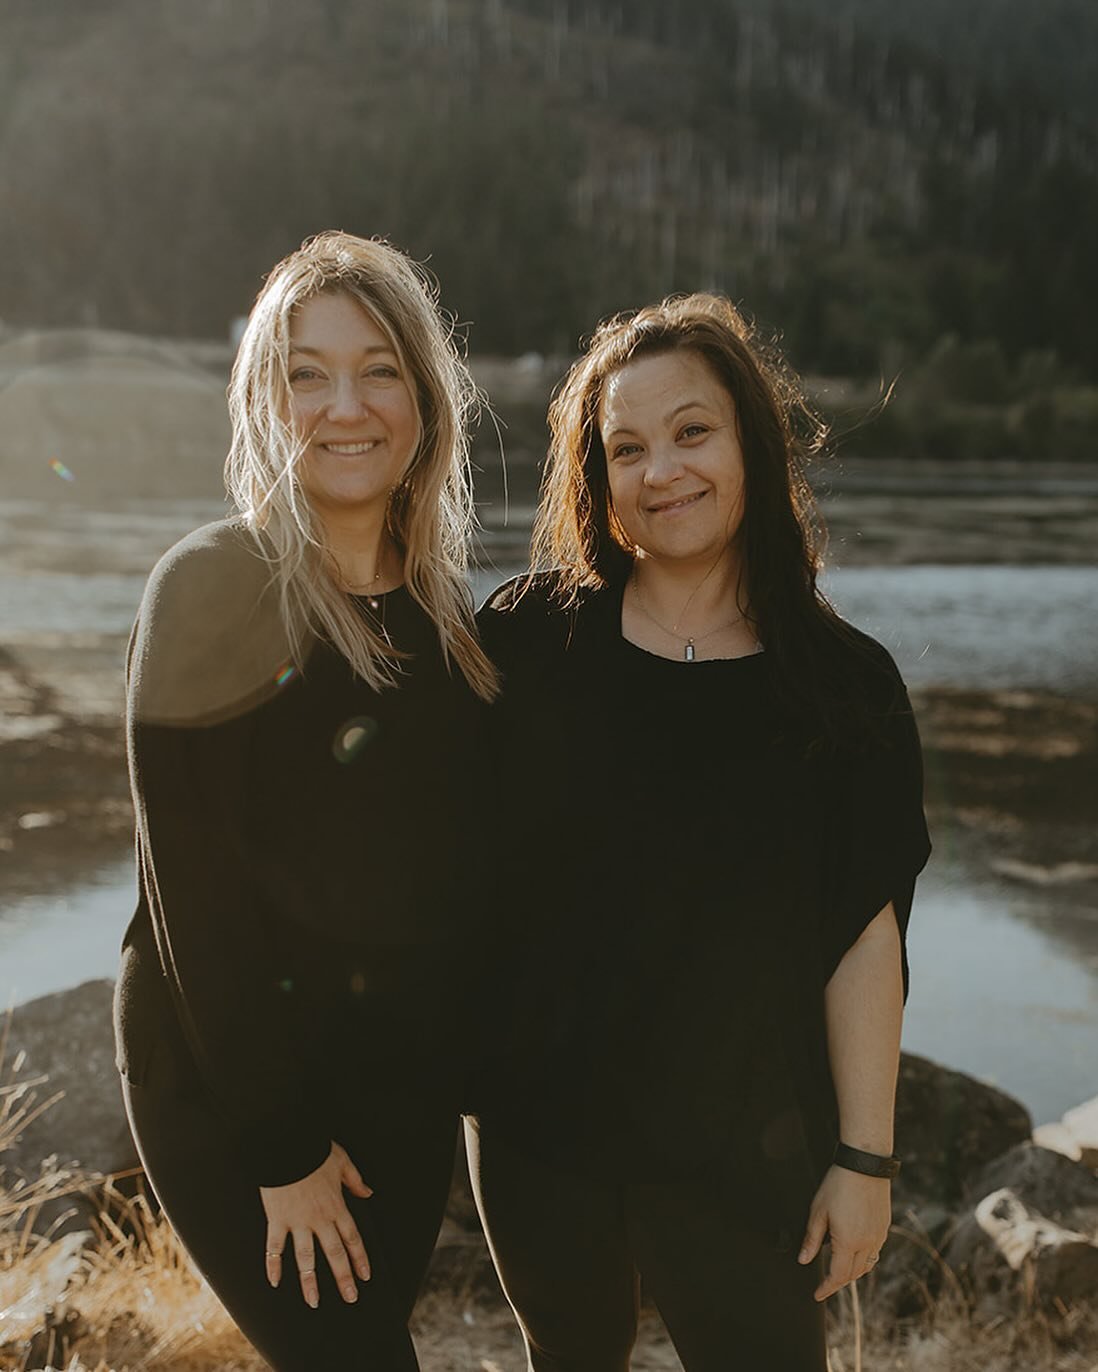 Happy weekend from your Flourish team!

We&rsquo;ll be cohosting the third annual Camp Flourish retreat this fall where you&rsquo;ll get to experience the best of what we each have to offer, from guided reflective writing to sound bath, movement to m